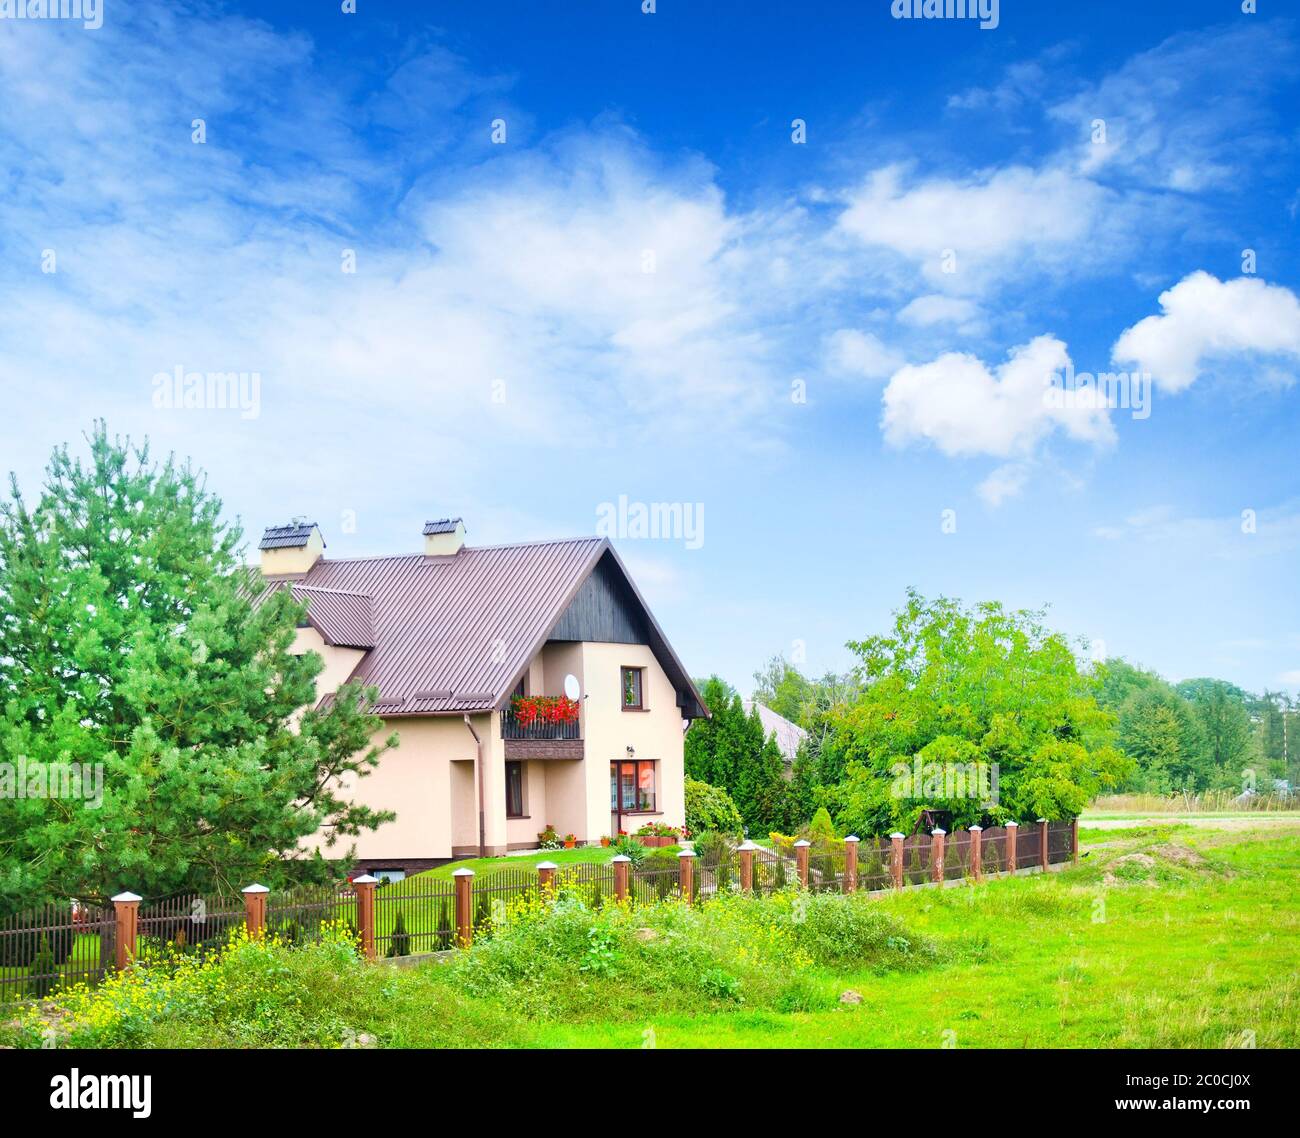 House in Polland Stock Photo